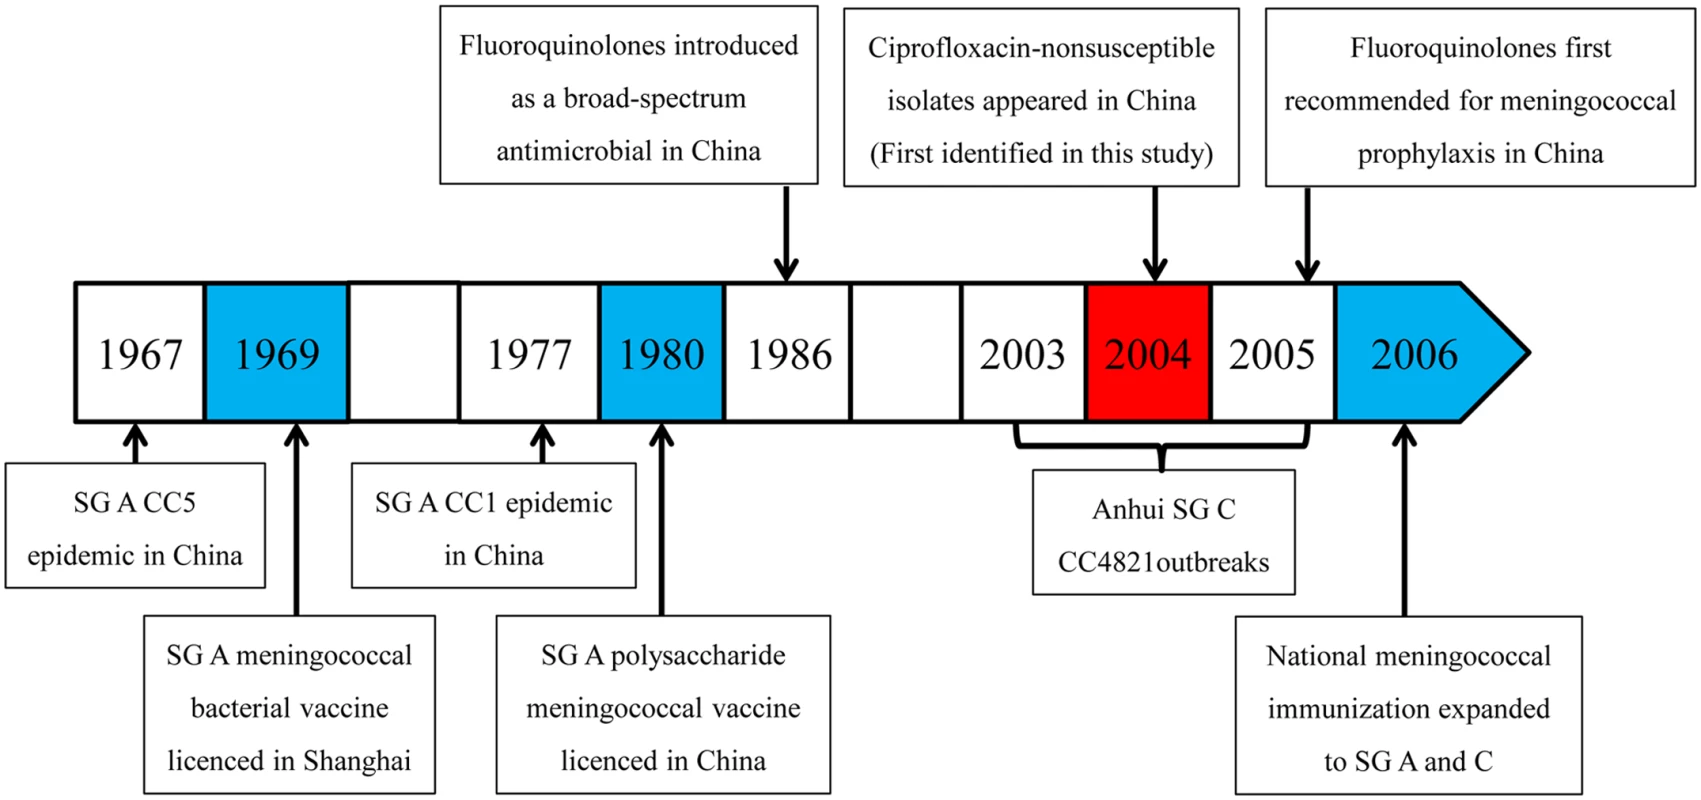 Timeline for the introduction of fluroquinolones and vaccines, and clonal waves of <i>N</i>. <i>meningitidis</i> in China.